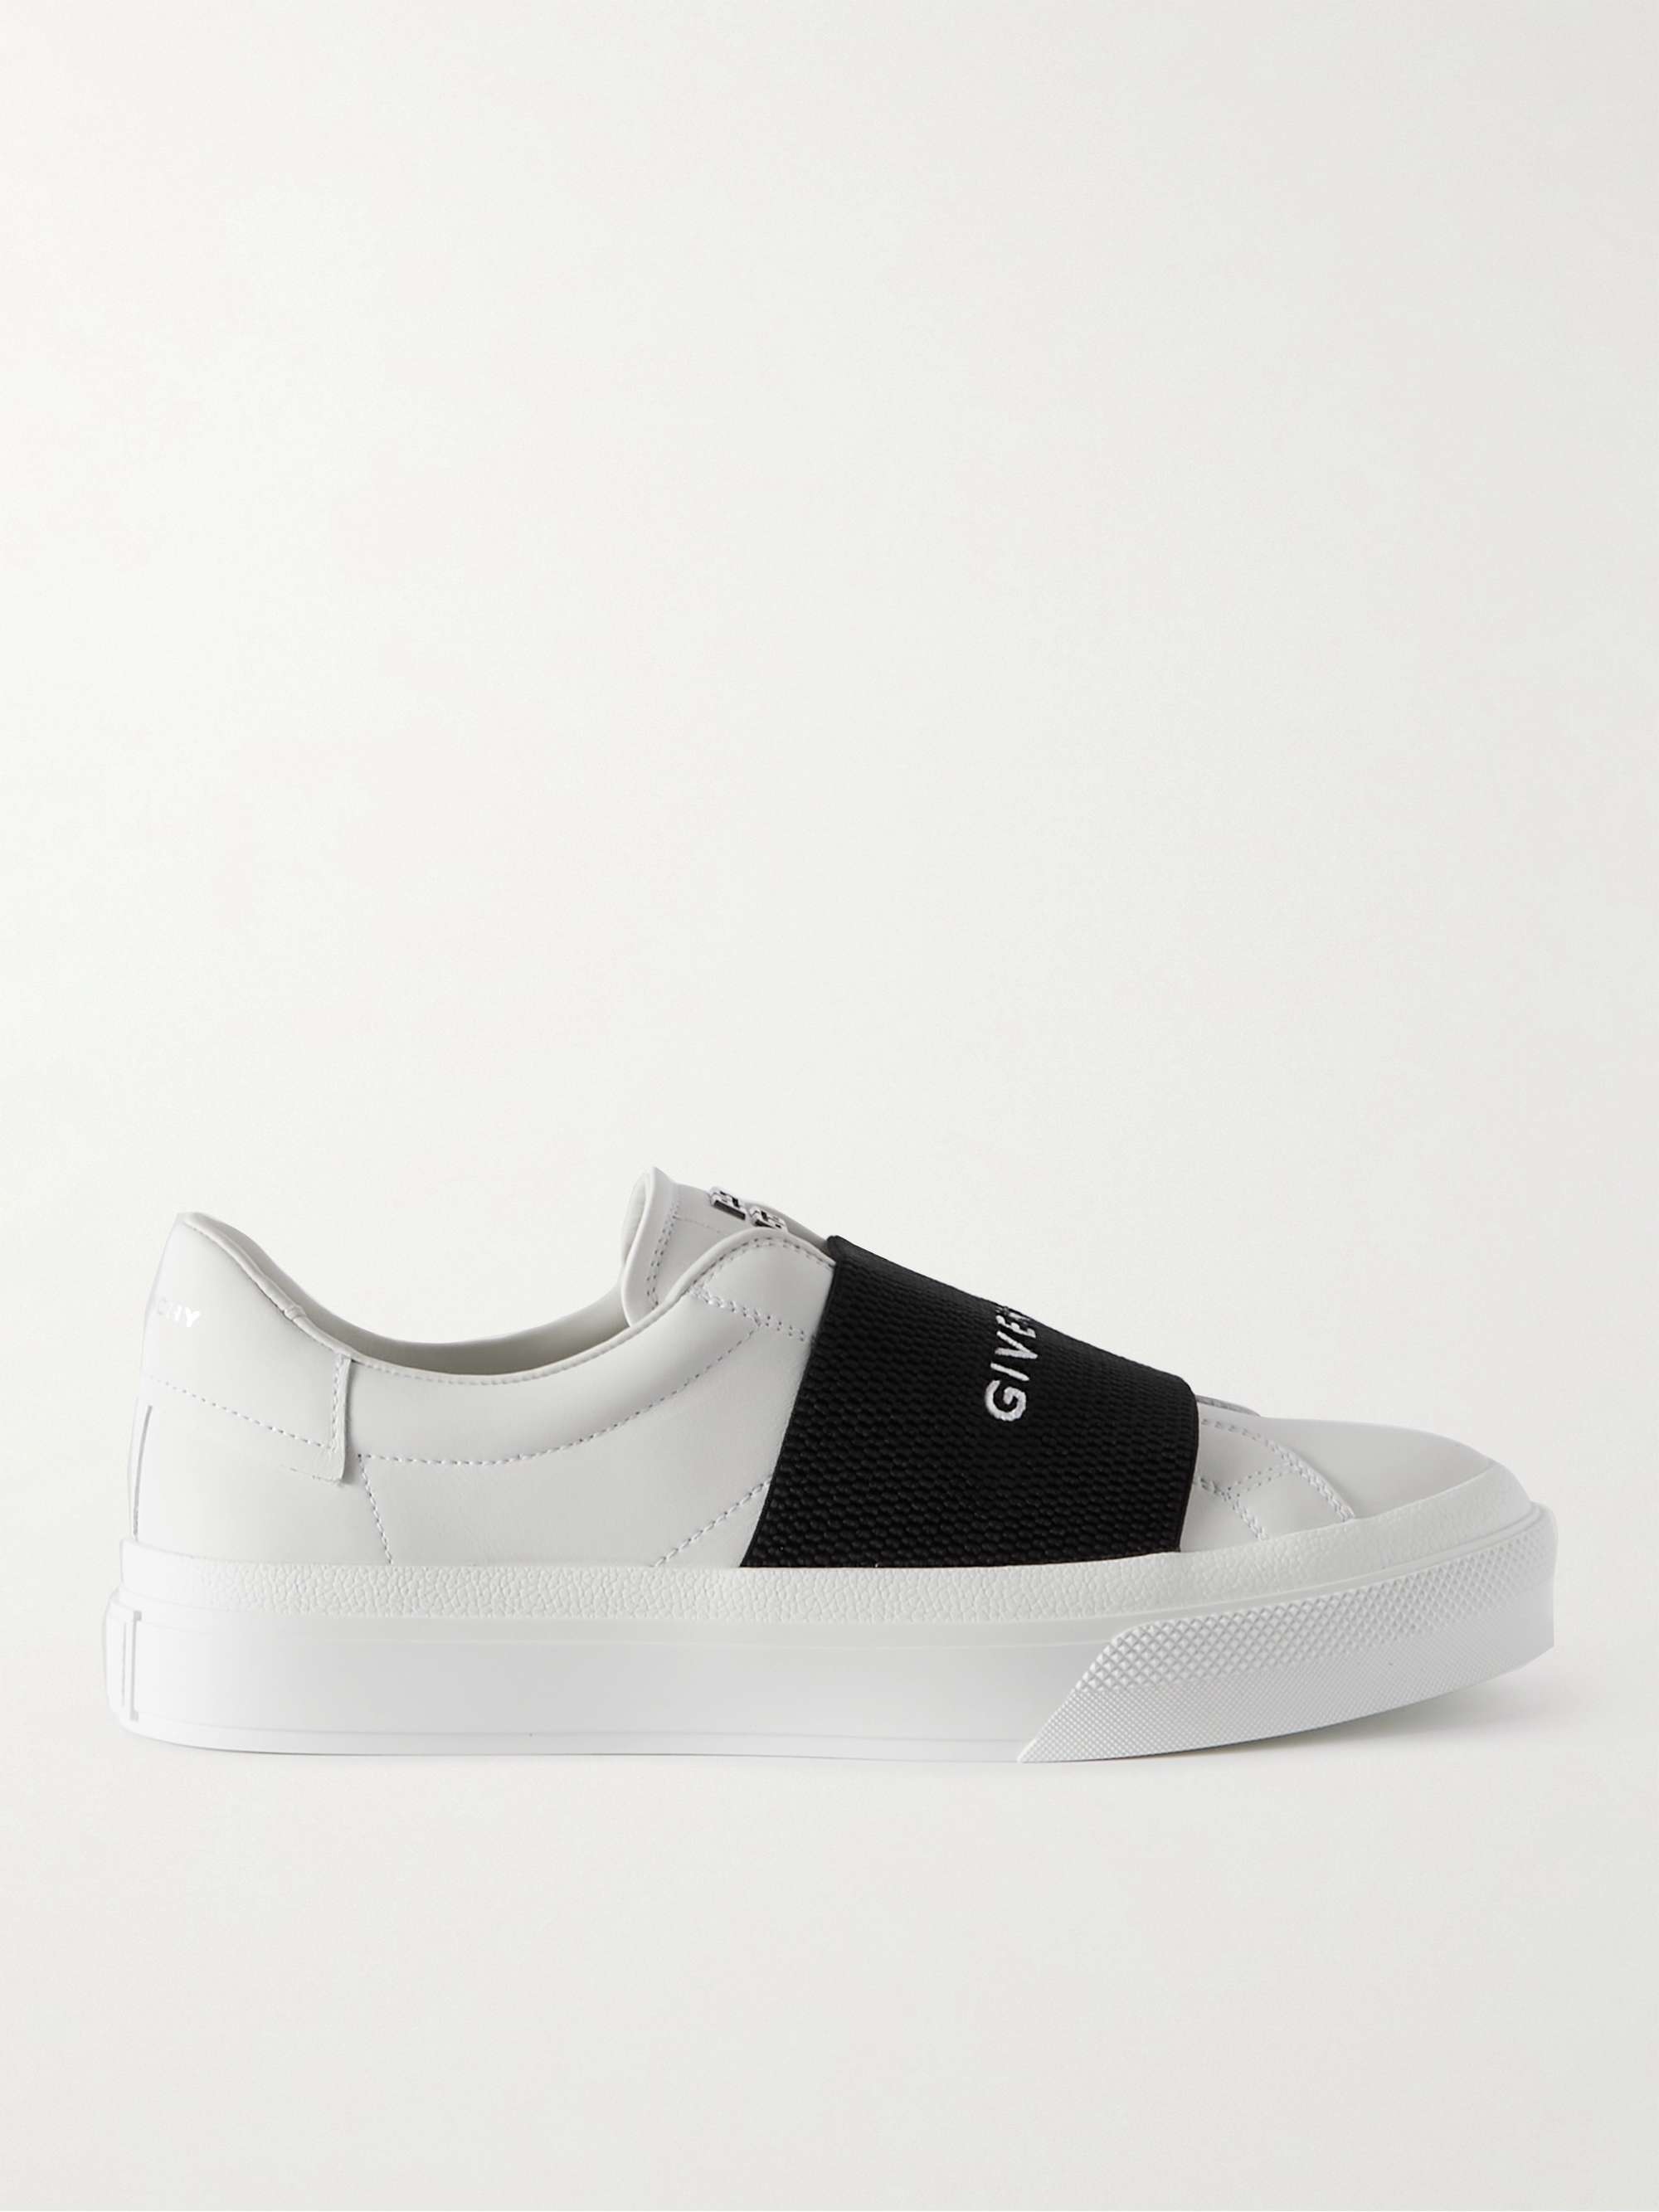 GIVENCHY City Slip-On Leather Sneakers | MR PORTER